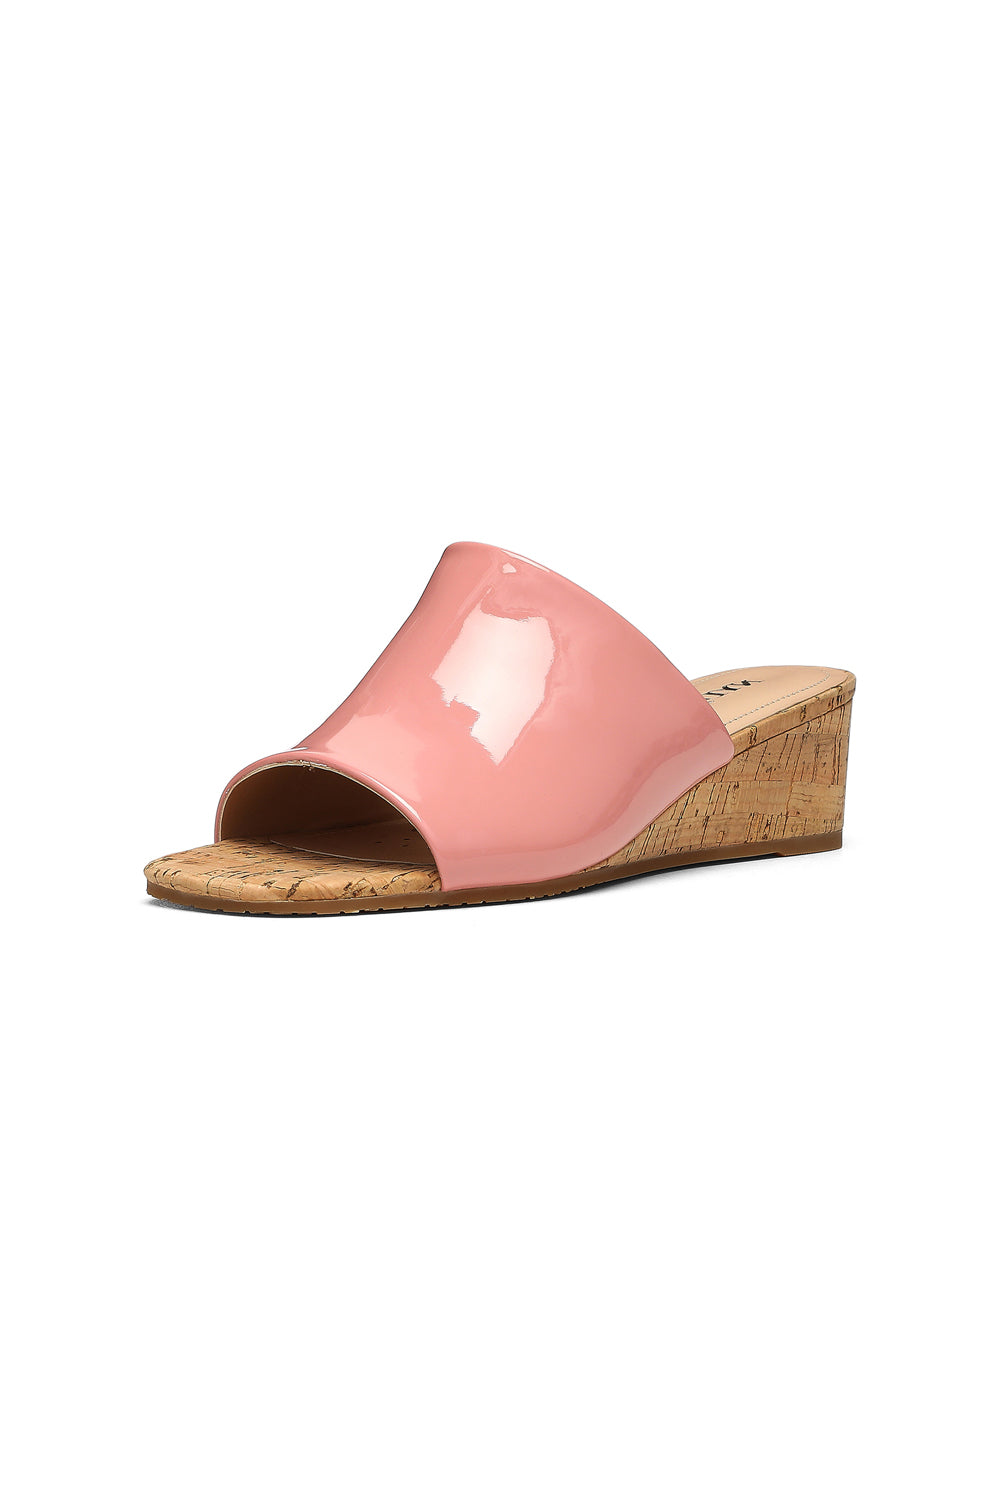 NYDJ Claudine Wedge Mule Sandals In Patent Leather - Blush Pink